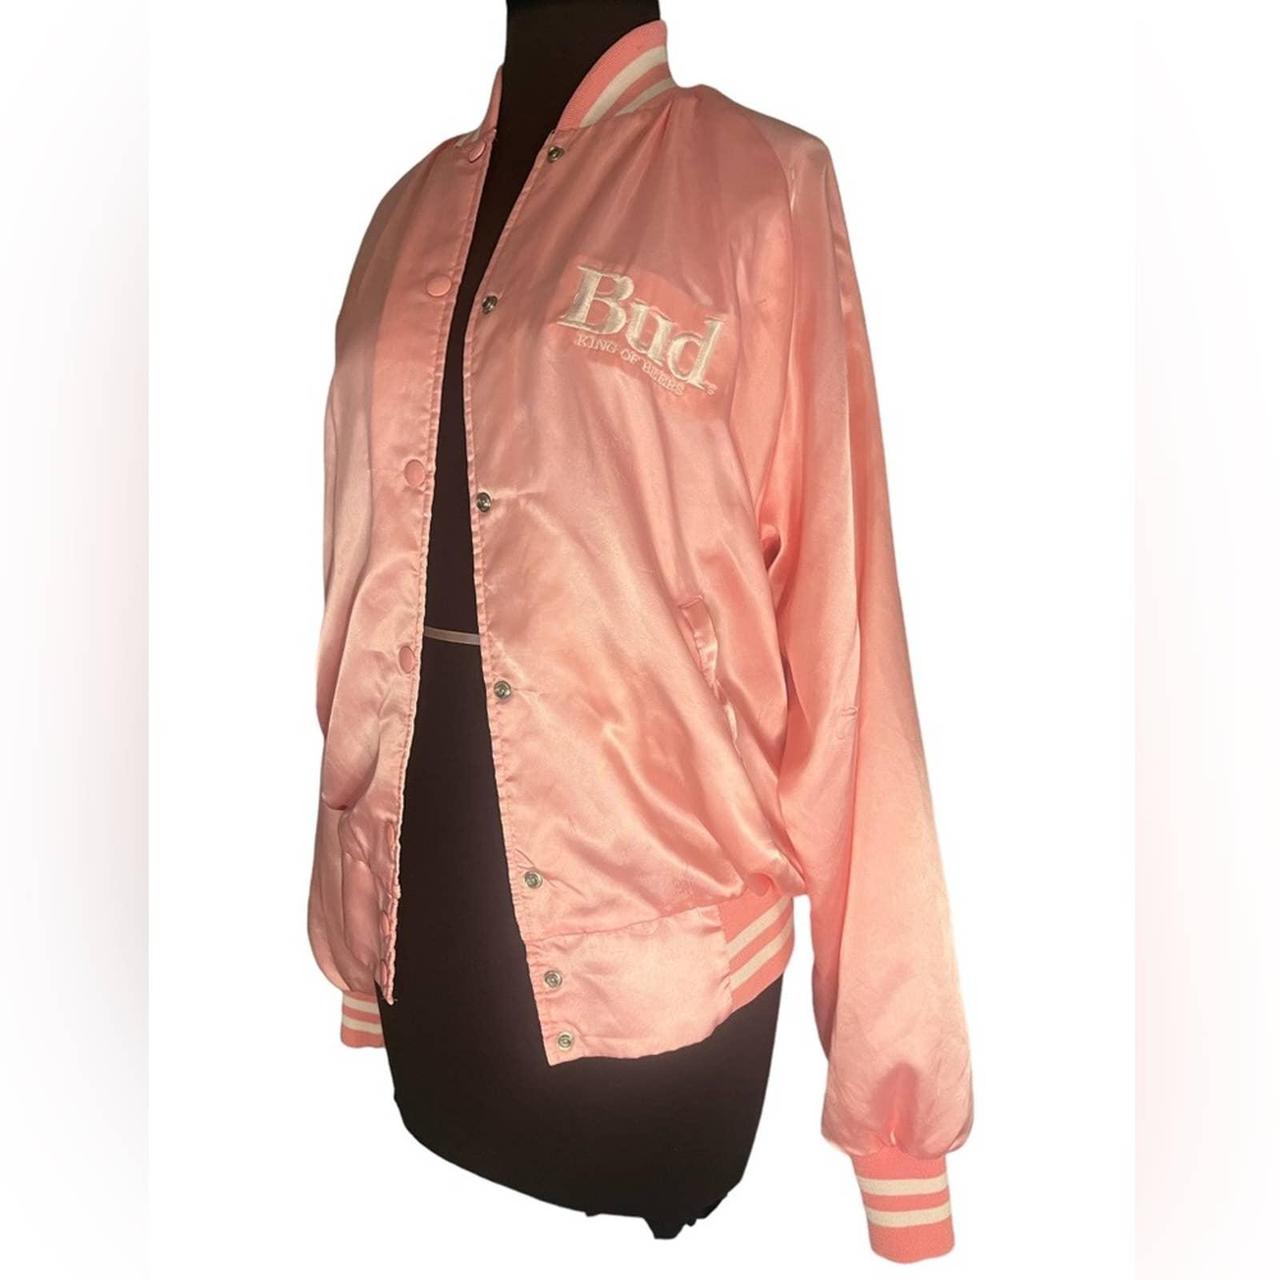 Baby Pink Satin Bomber Jacket with Striped Sleeves